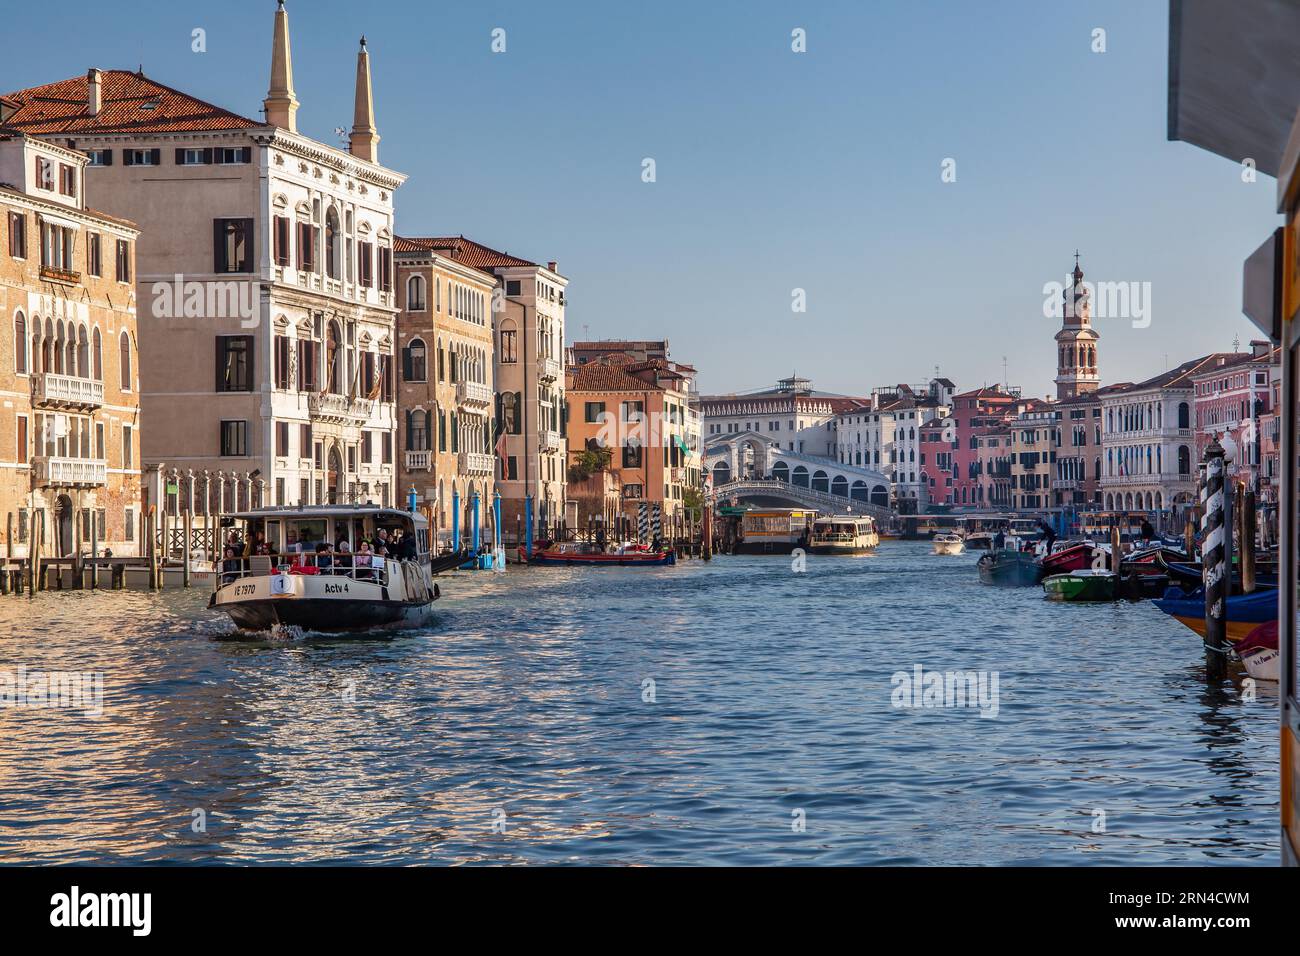 Grand Canal with water buses, vaporetti and the Rialto Bridge, Venice, Veneto, Northern Italy, Italy. UNESCO World Heritage Site Stock Photo